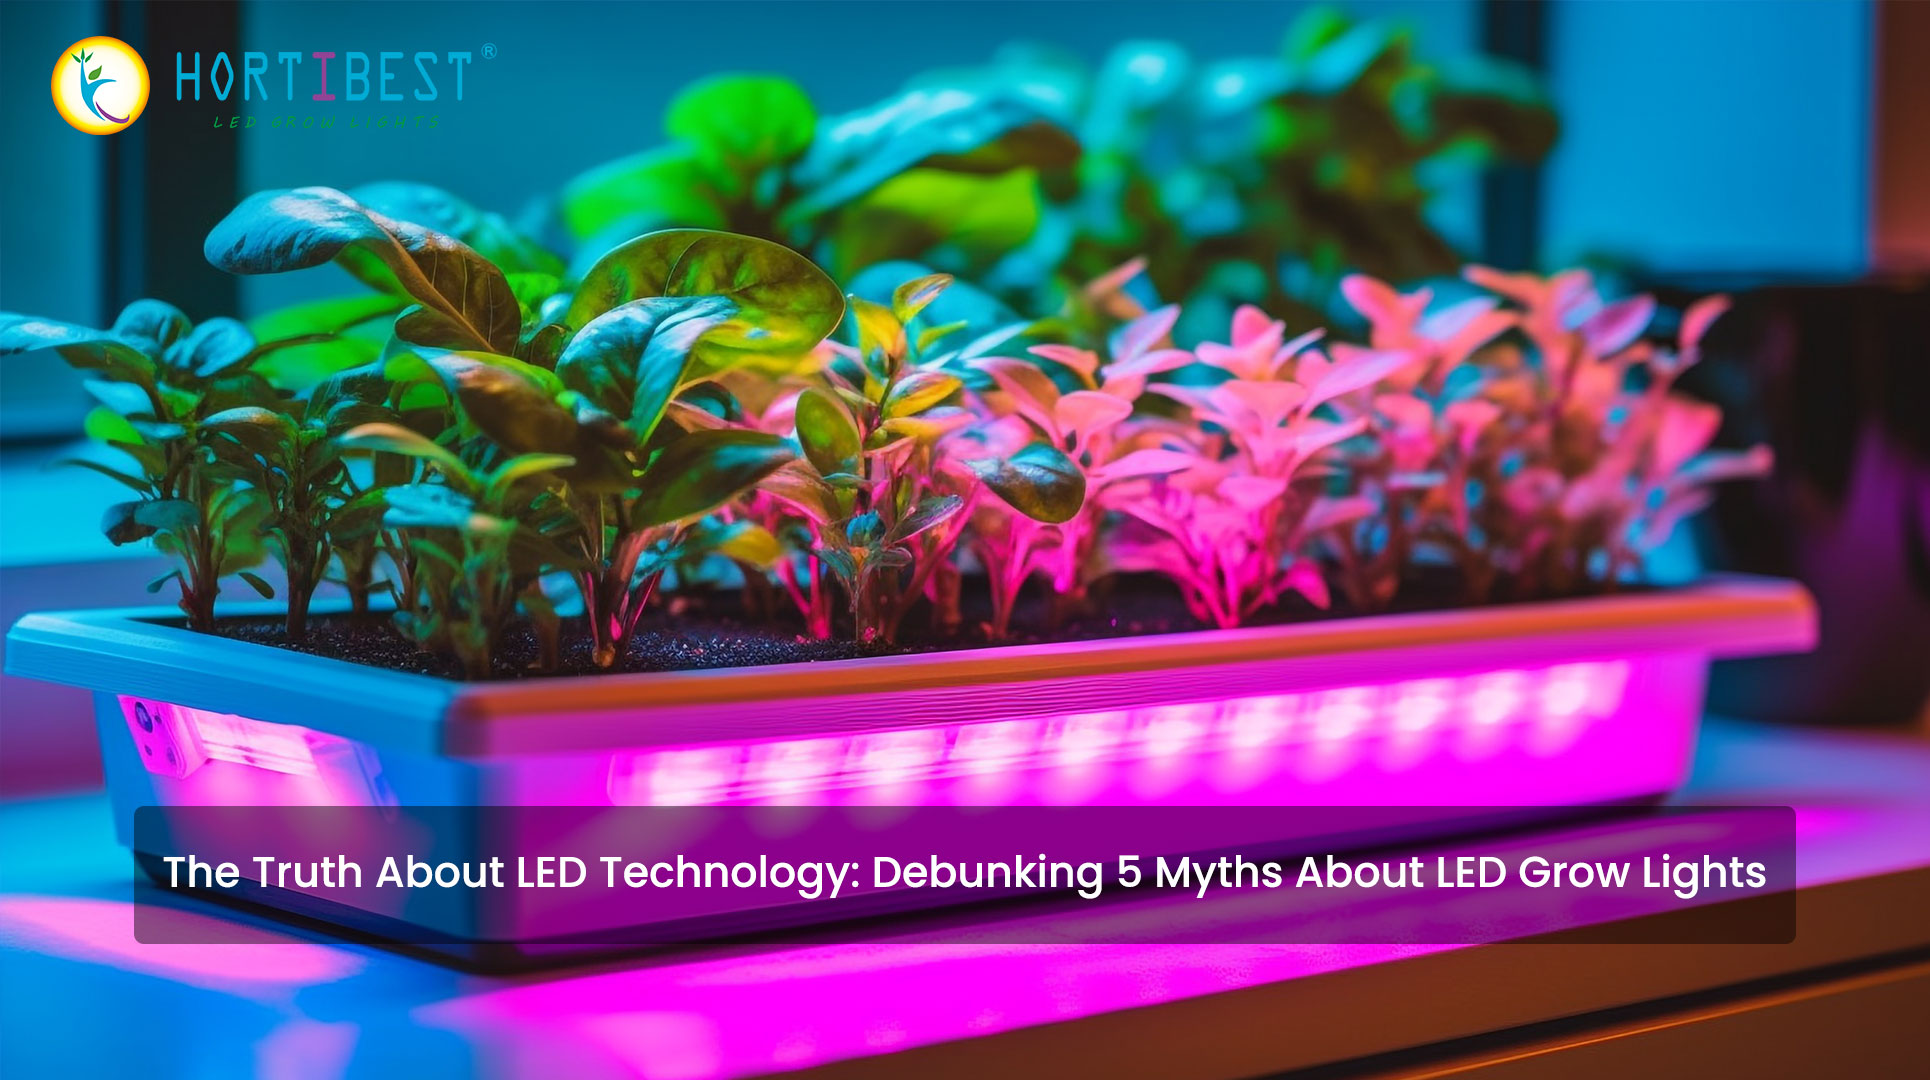 The Truth About LED Technology: Debunking 5 Myths About LED Grow Lights